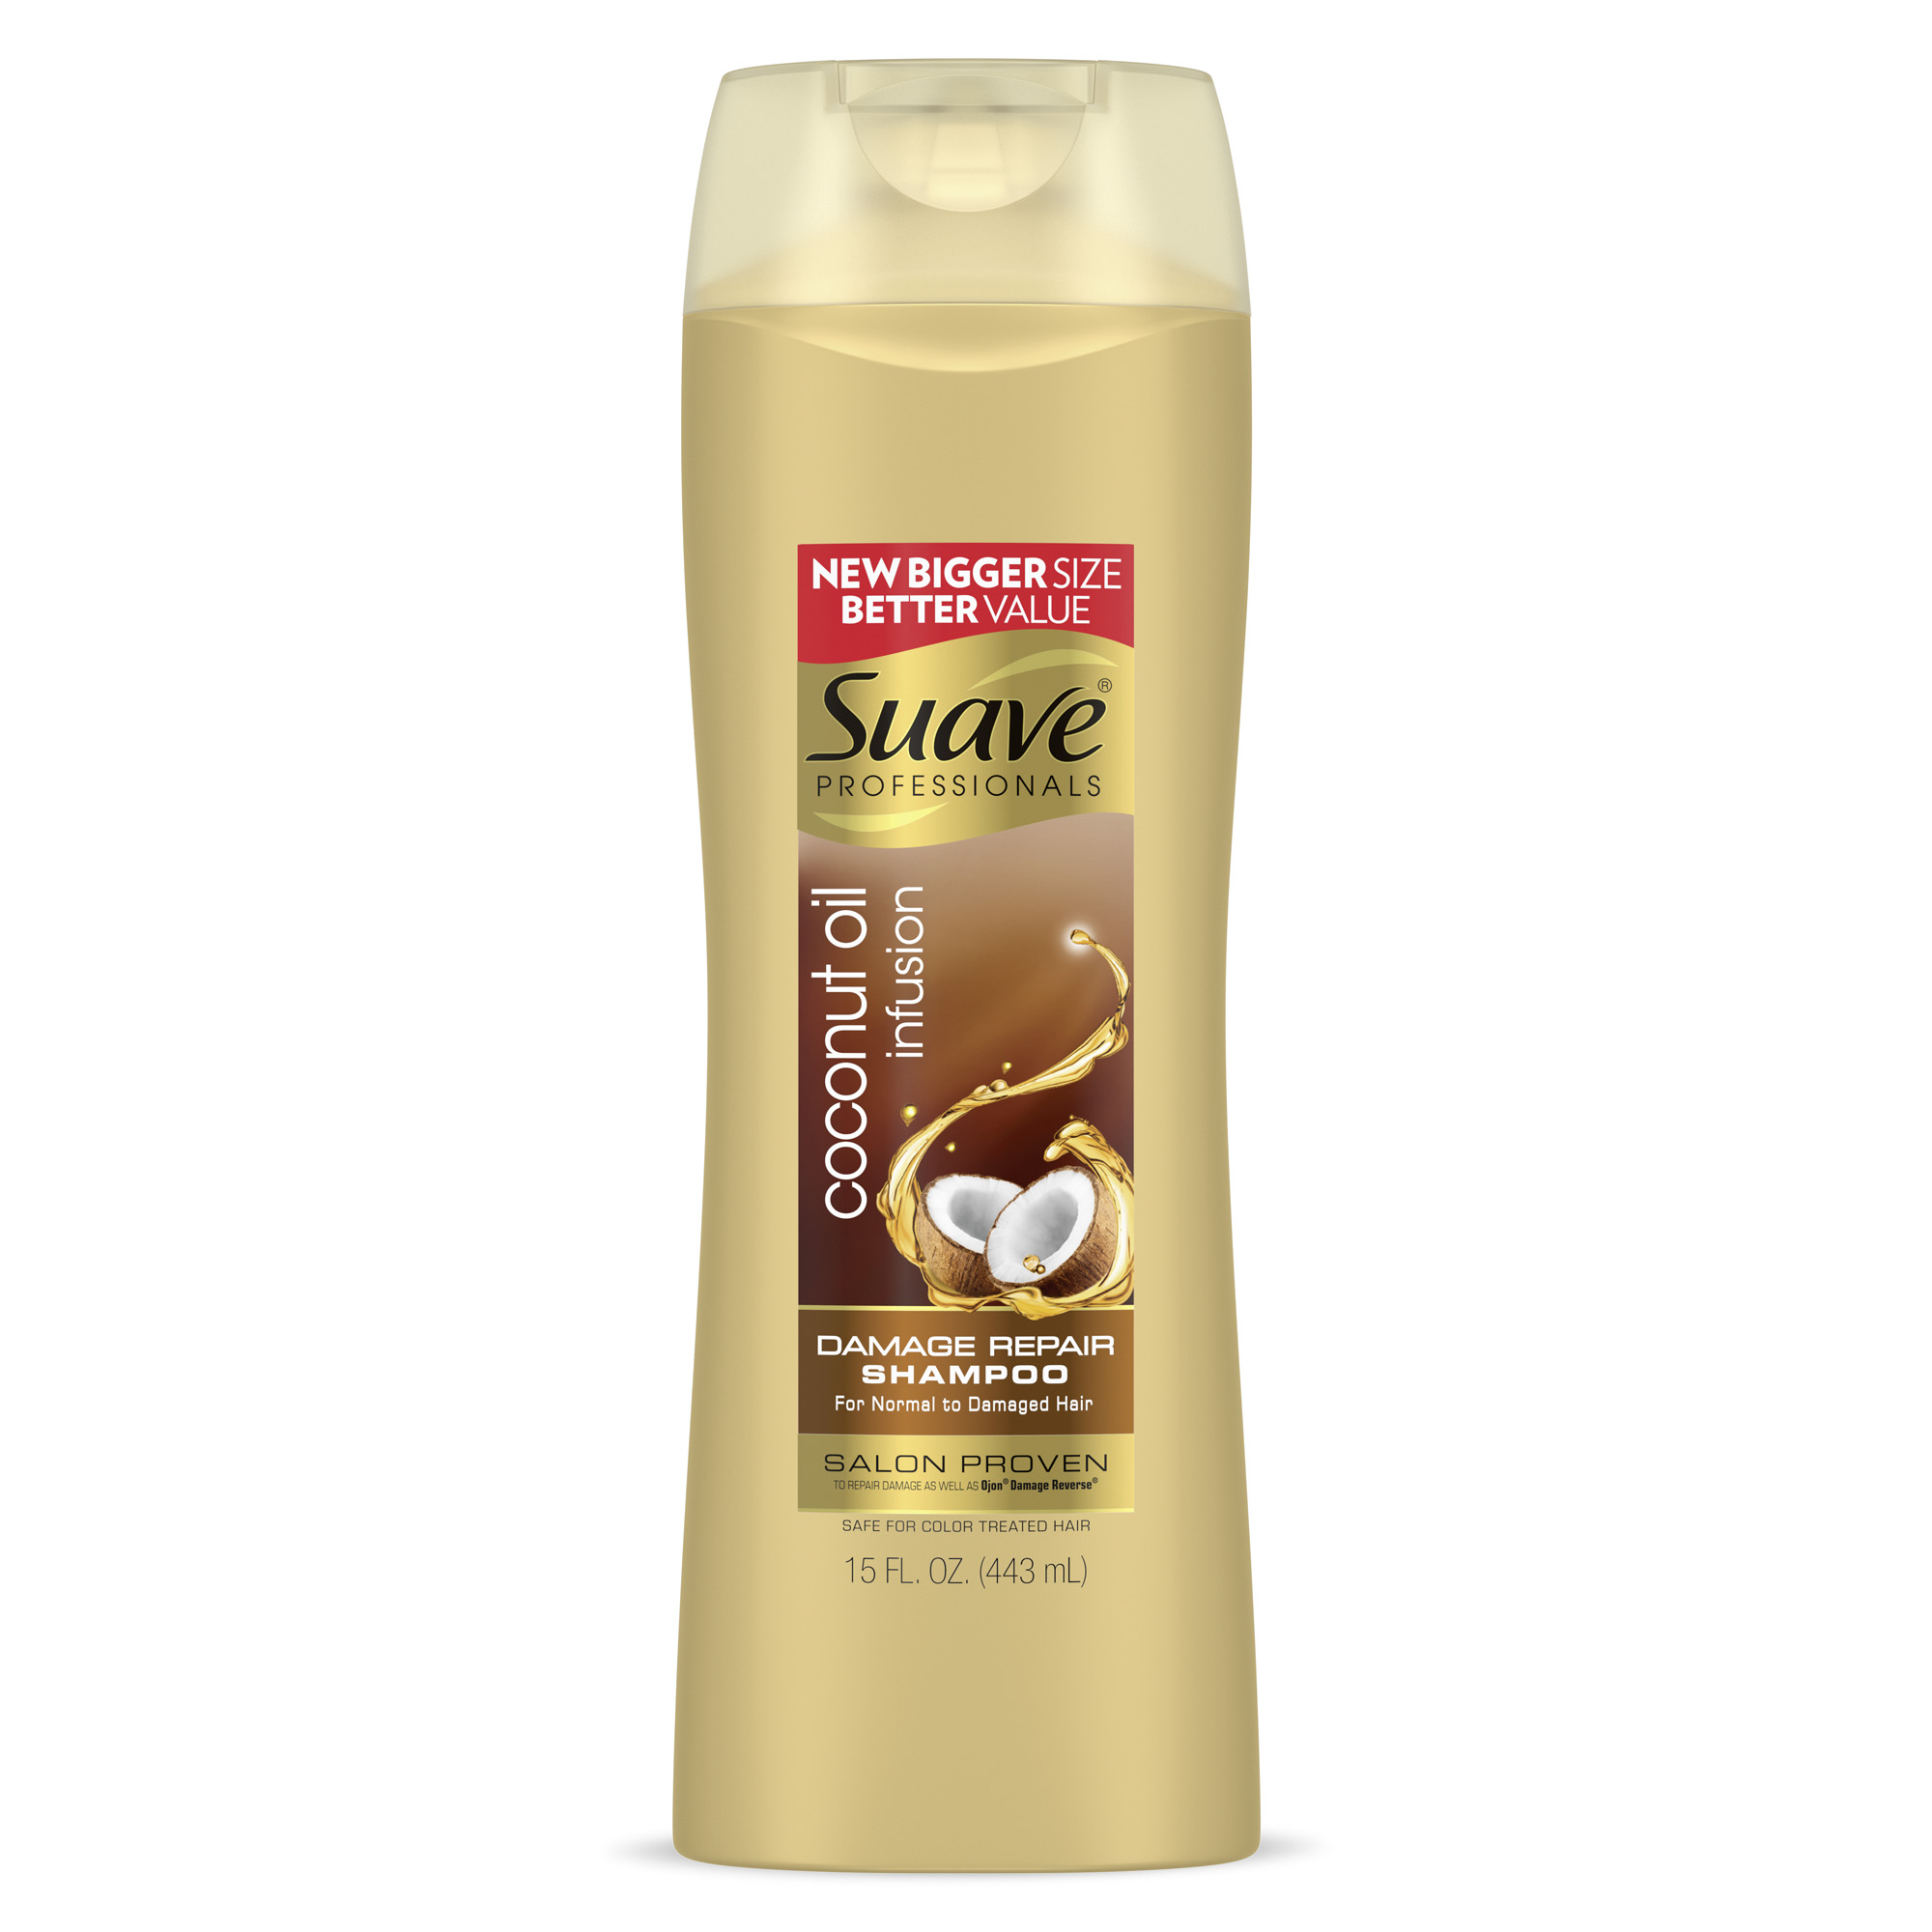 Suave Professionals Moisturizing Repairing Daily Shampoo & Conditioner with Coconut Oil, Full Size Set, 2 Pack - image 3 of 9